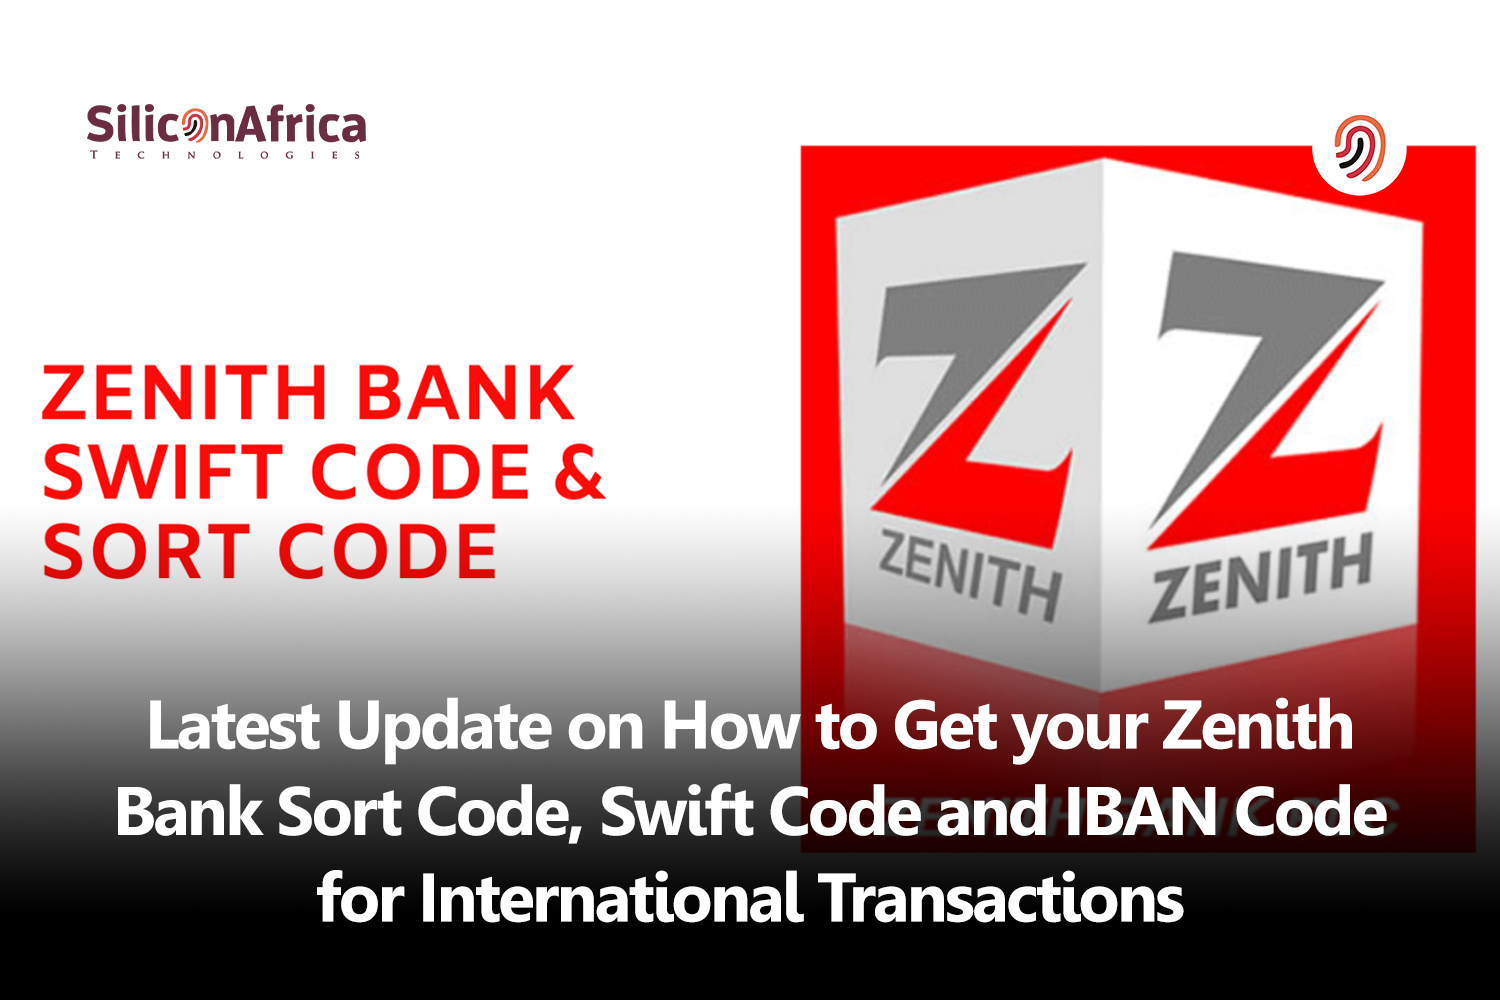 Latest Update on How to Get your Zenith Bank Sort Code, Swift Code, and IBAN Code for International Transactions